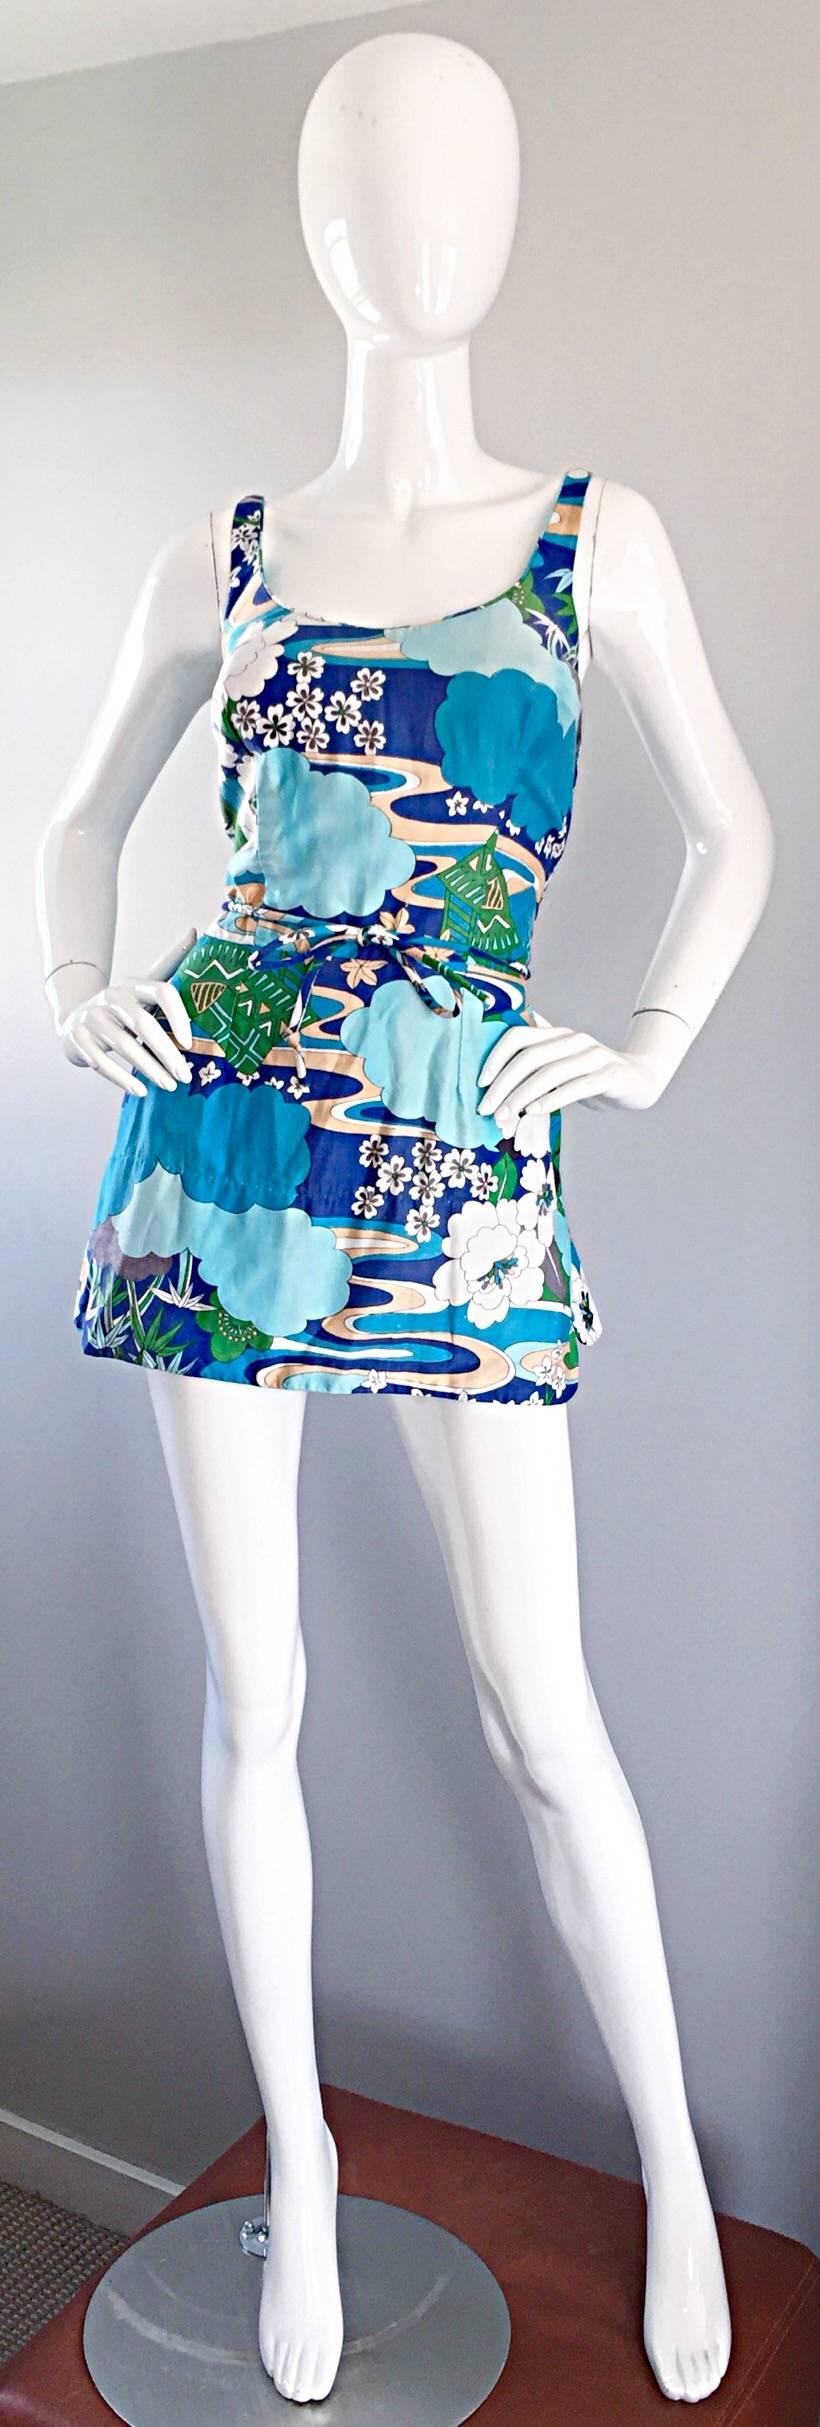 1960s Romper Swimsuit Onesie w/ Chineese Themed Print By Roxanne Perfection Fit 4